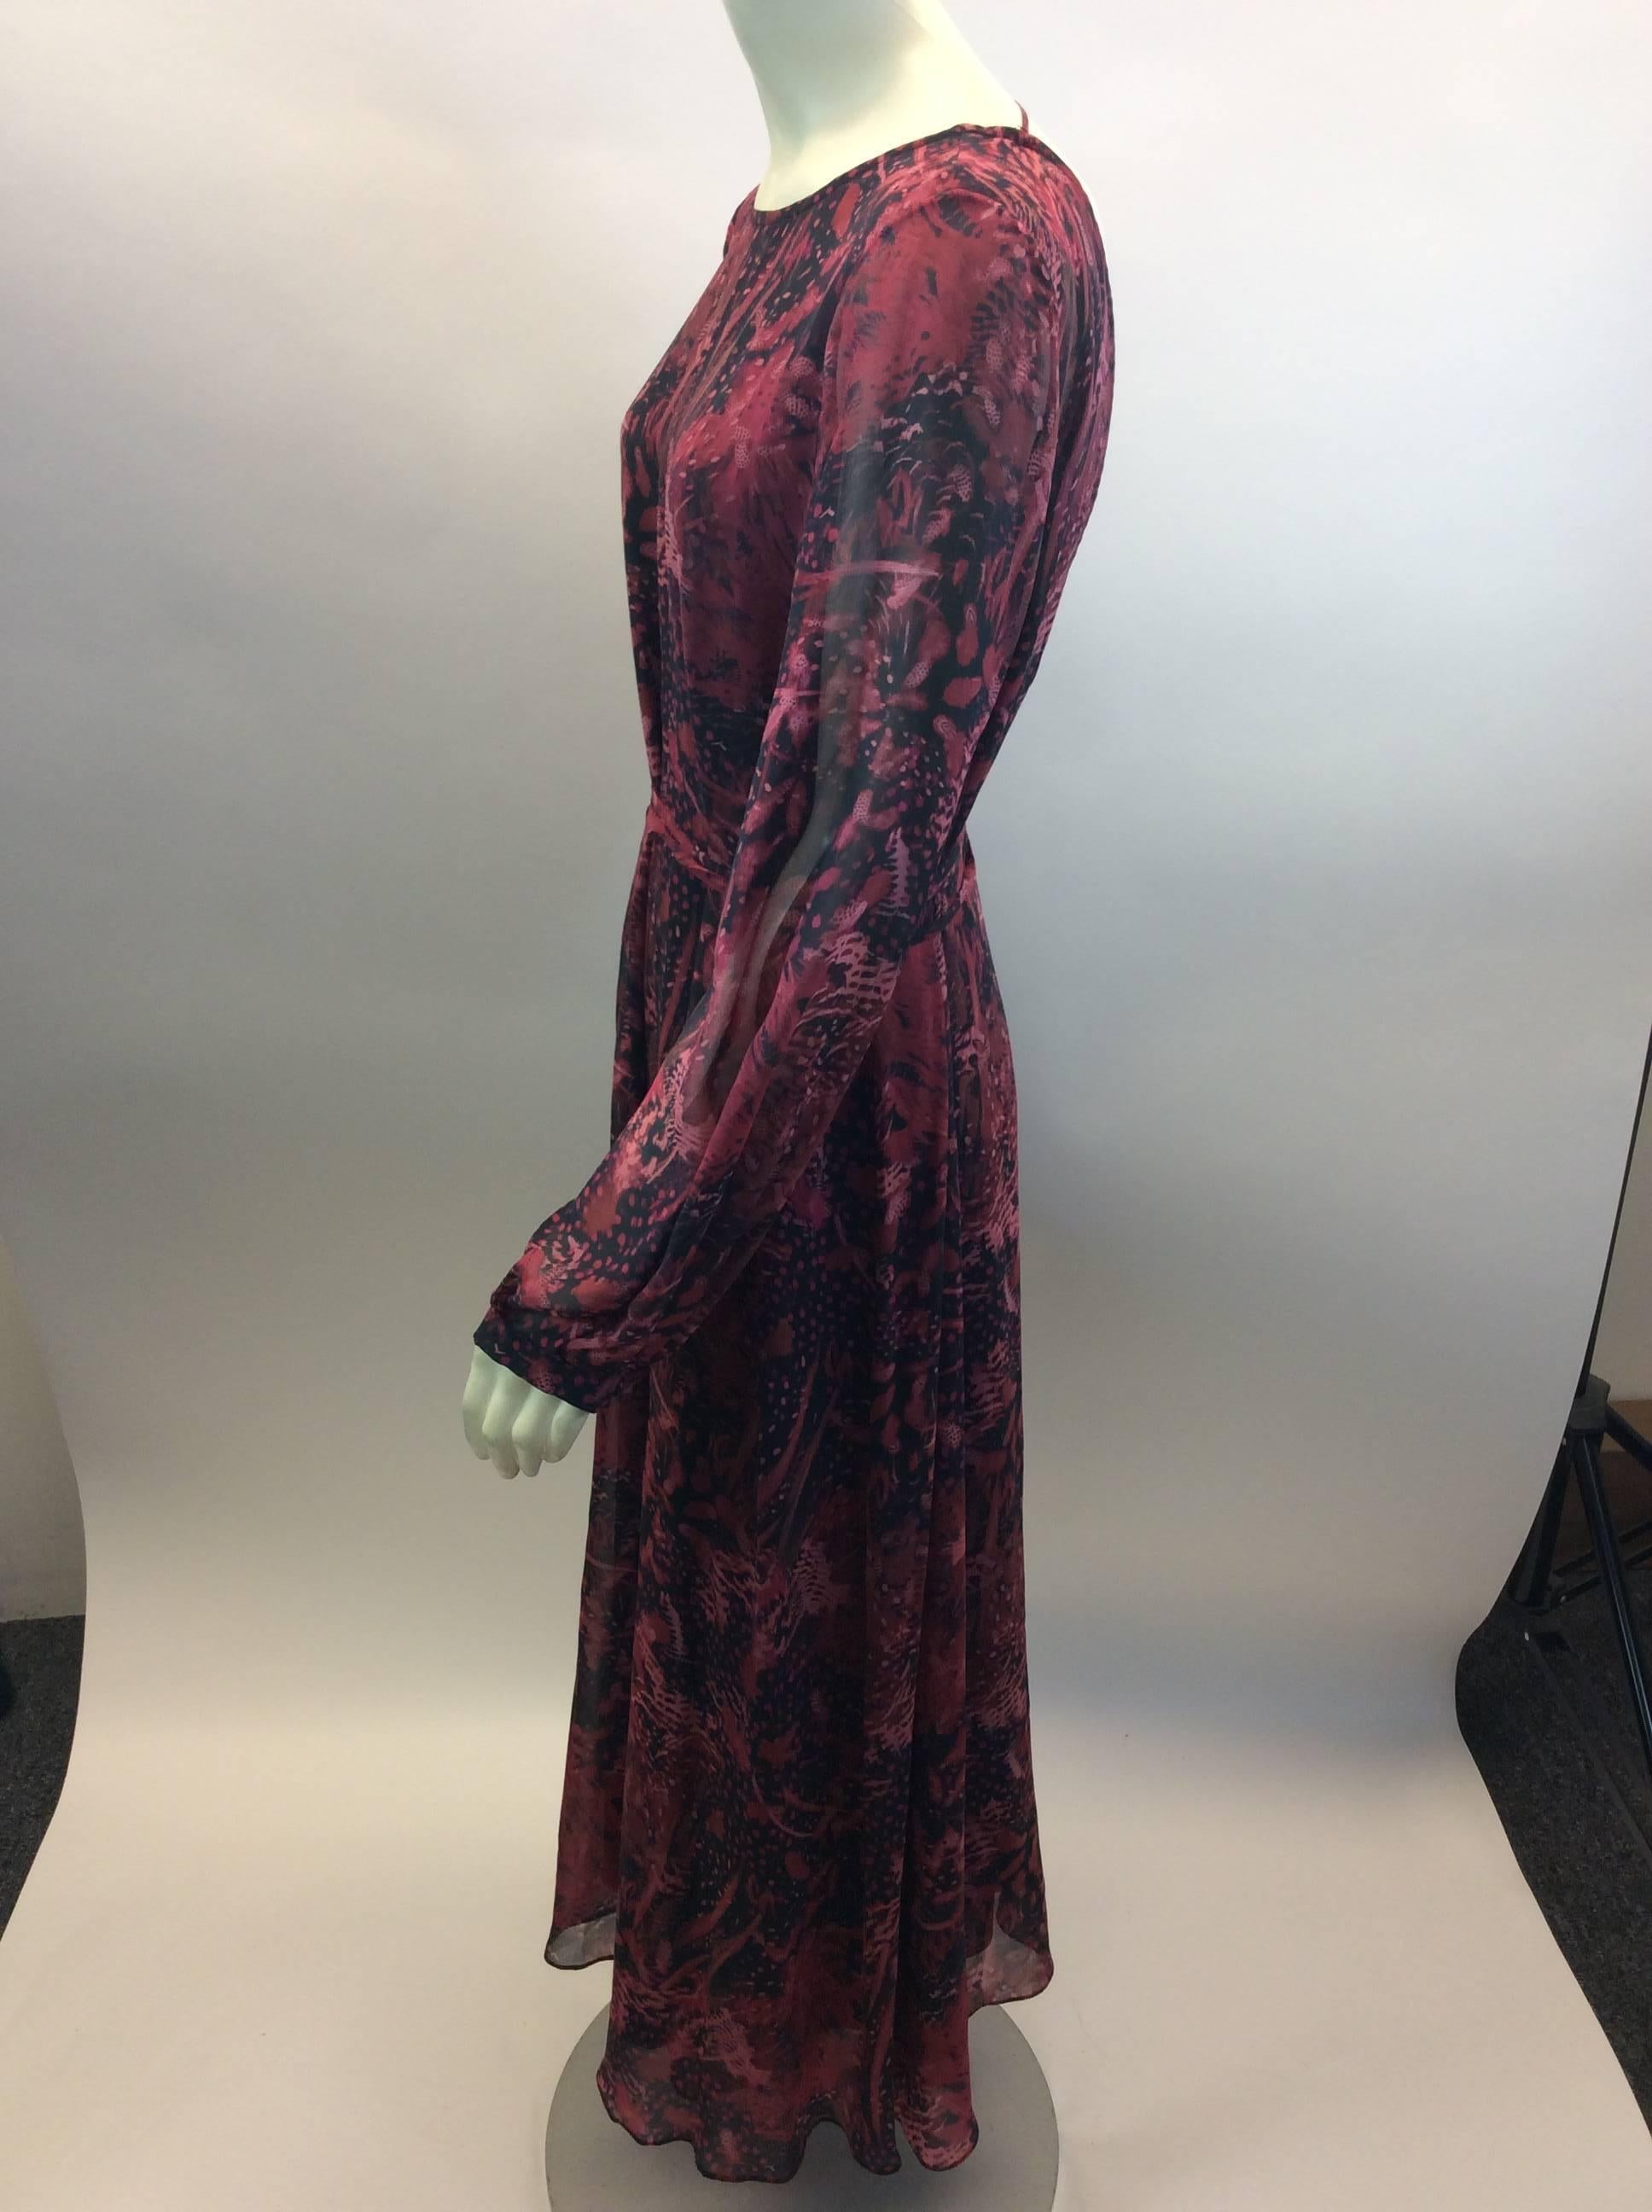 Iro Red and Black Print Maxi Dress
$225
Made in China
100% Silk
Size 36
Length 50